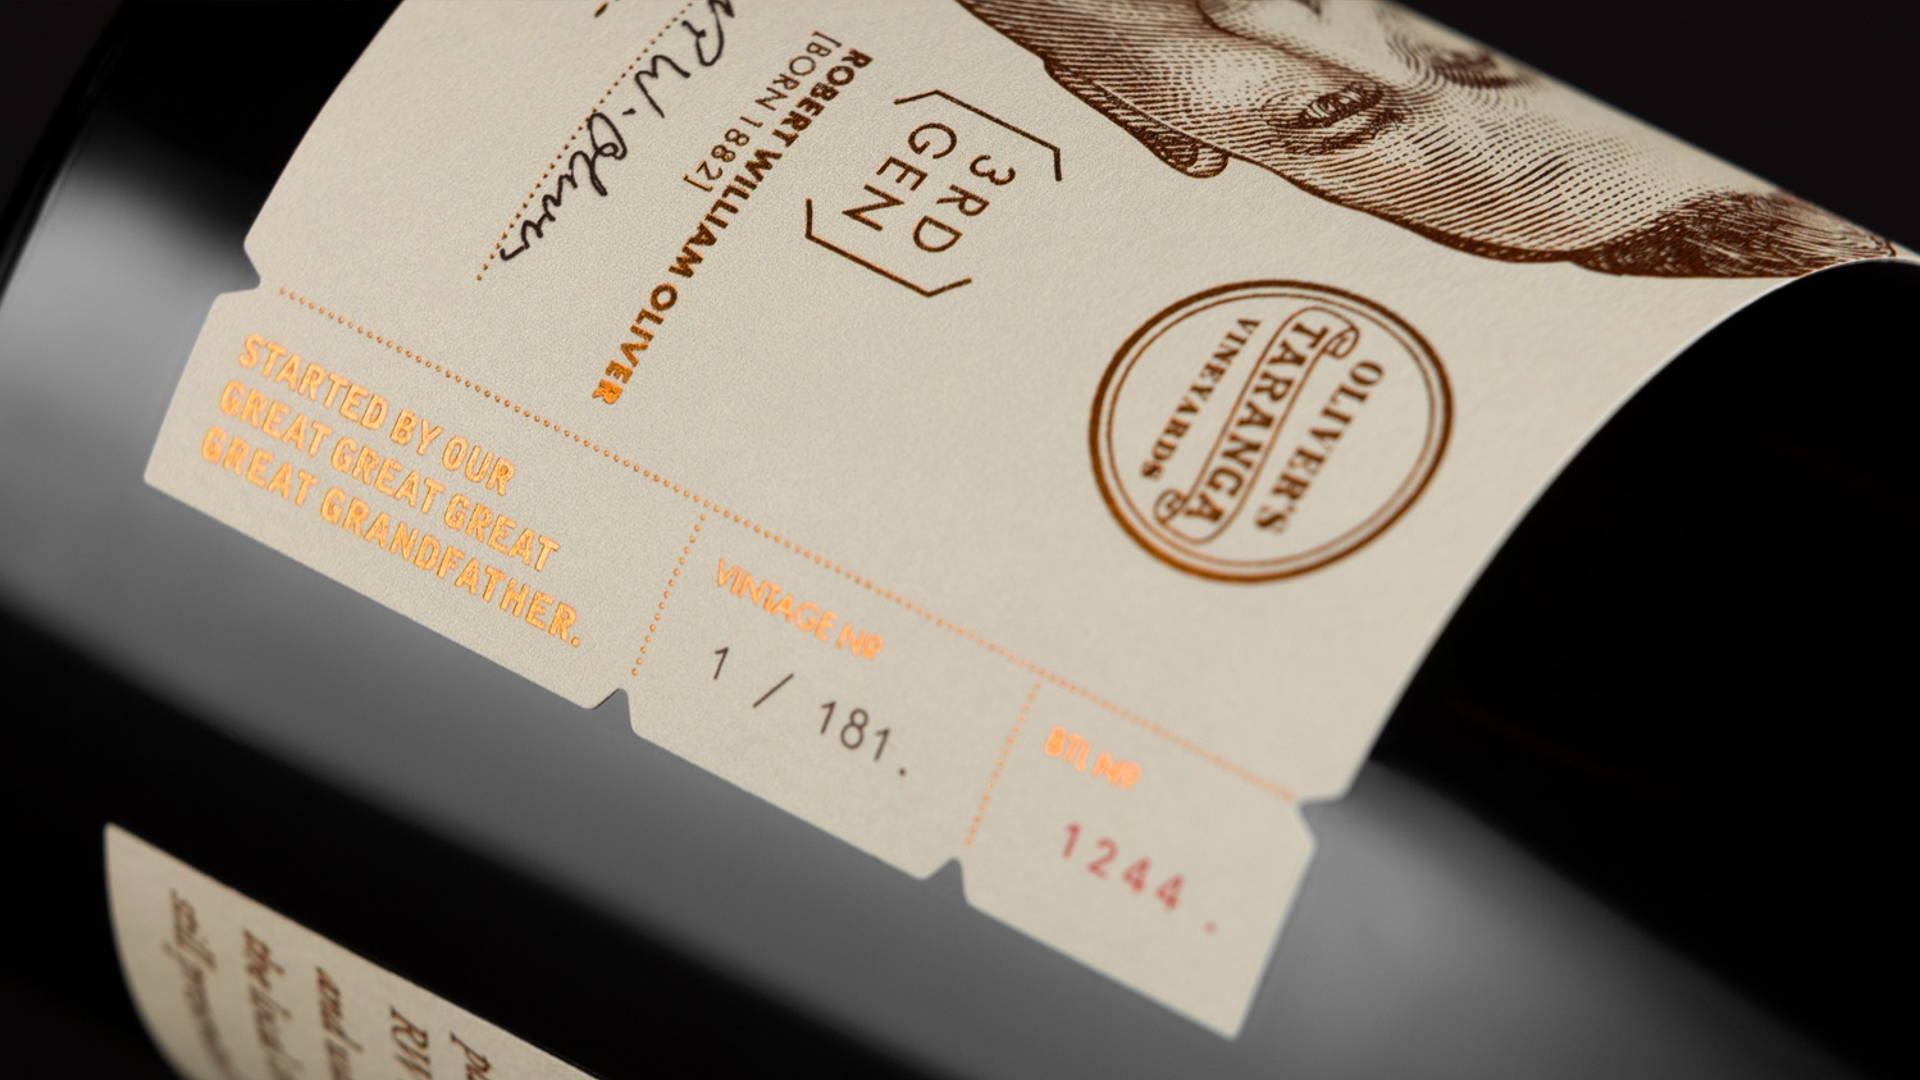 Featured image for Oliver's Taranga 'The Greats' Wine Label Pays Homage To The Family